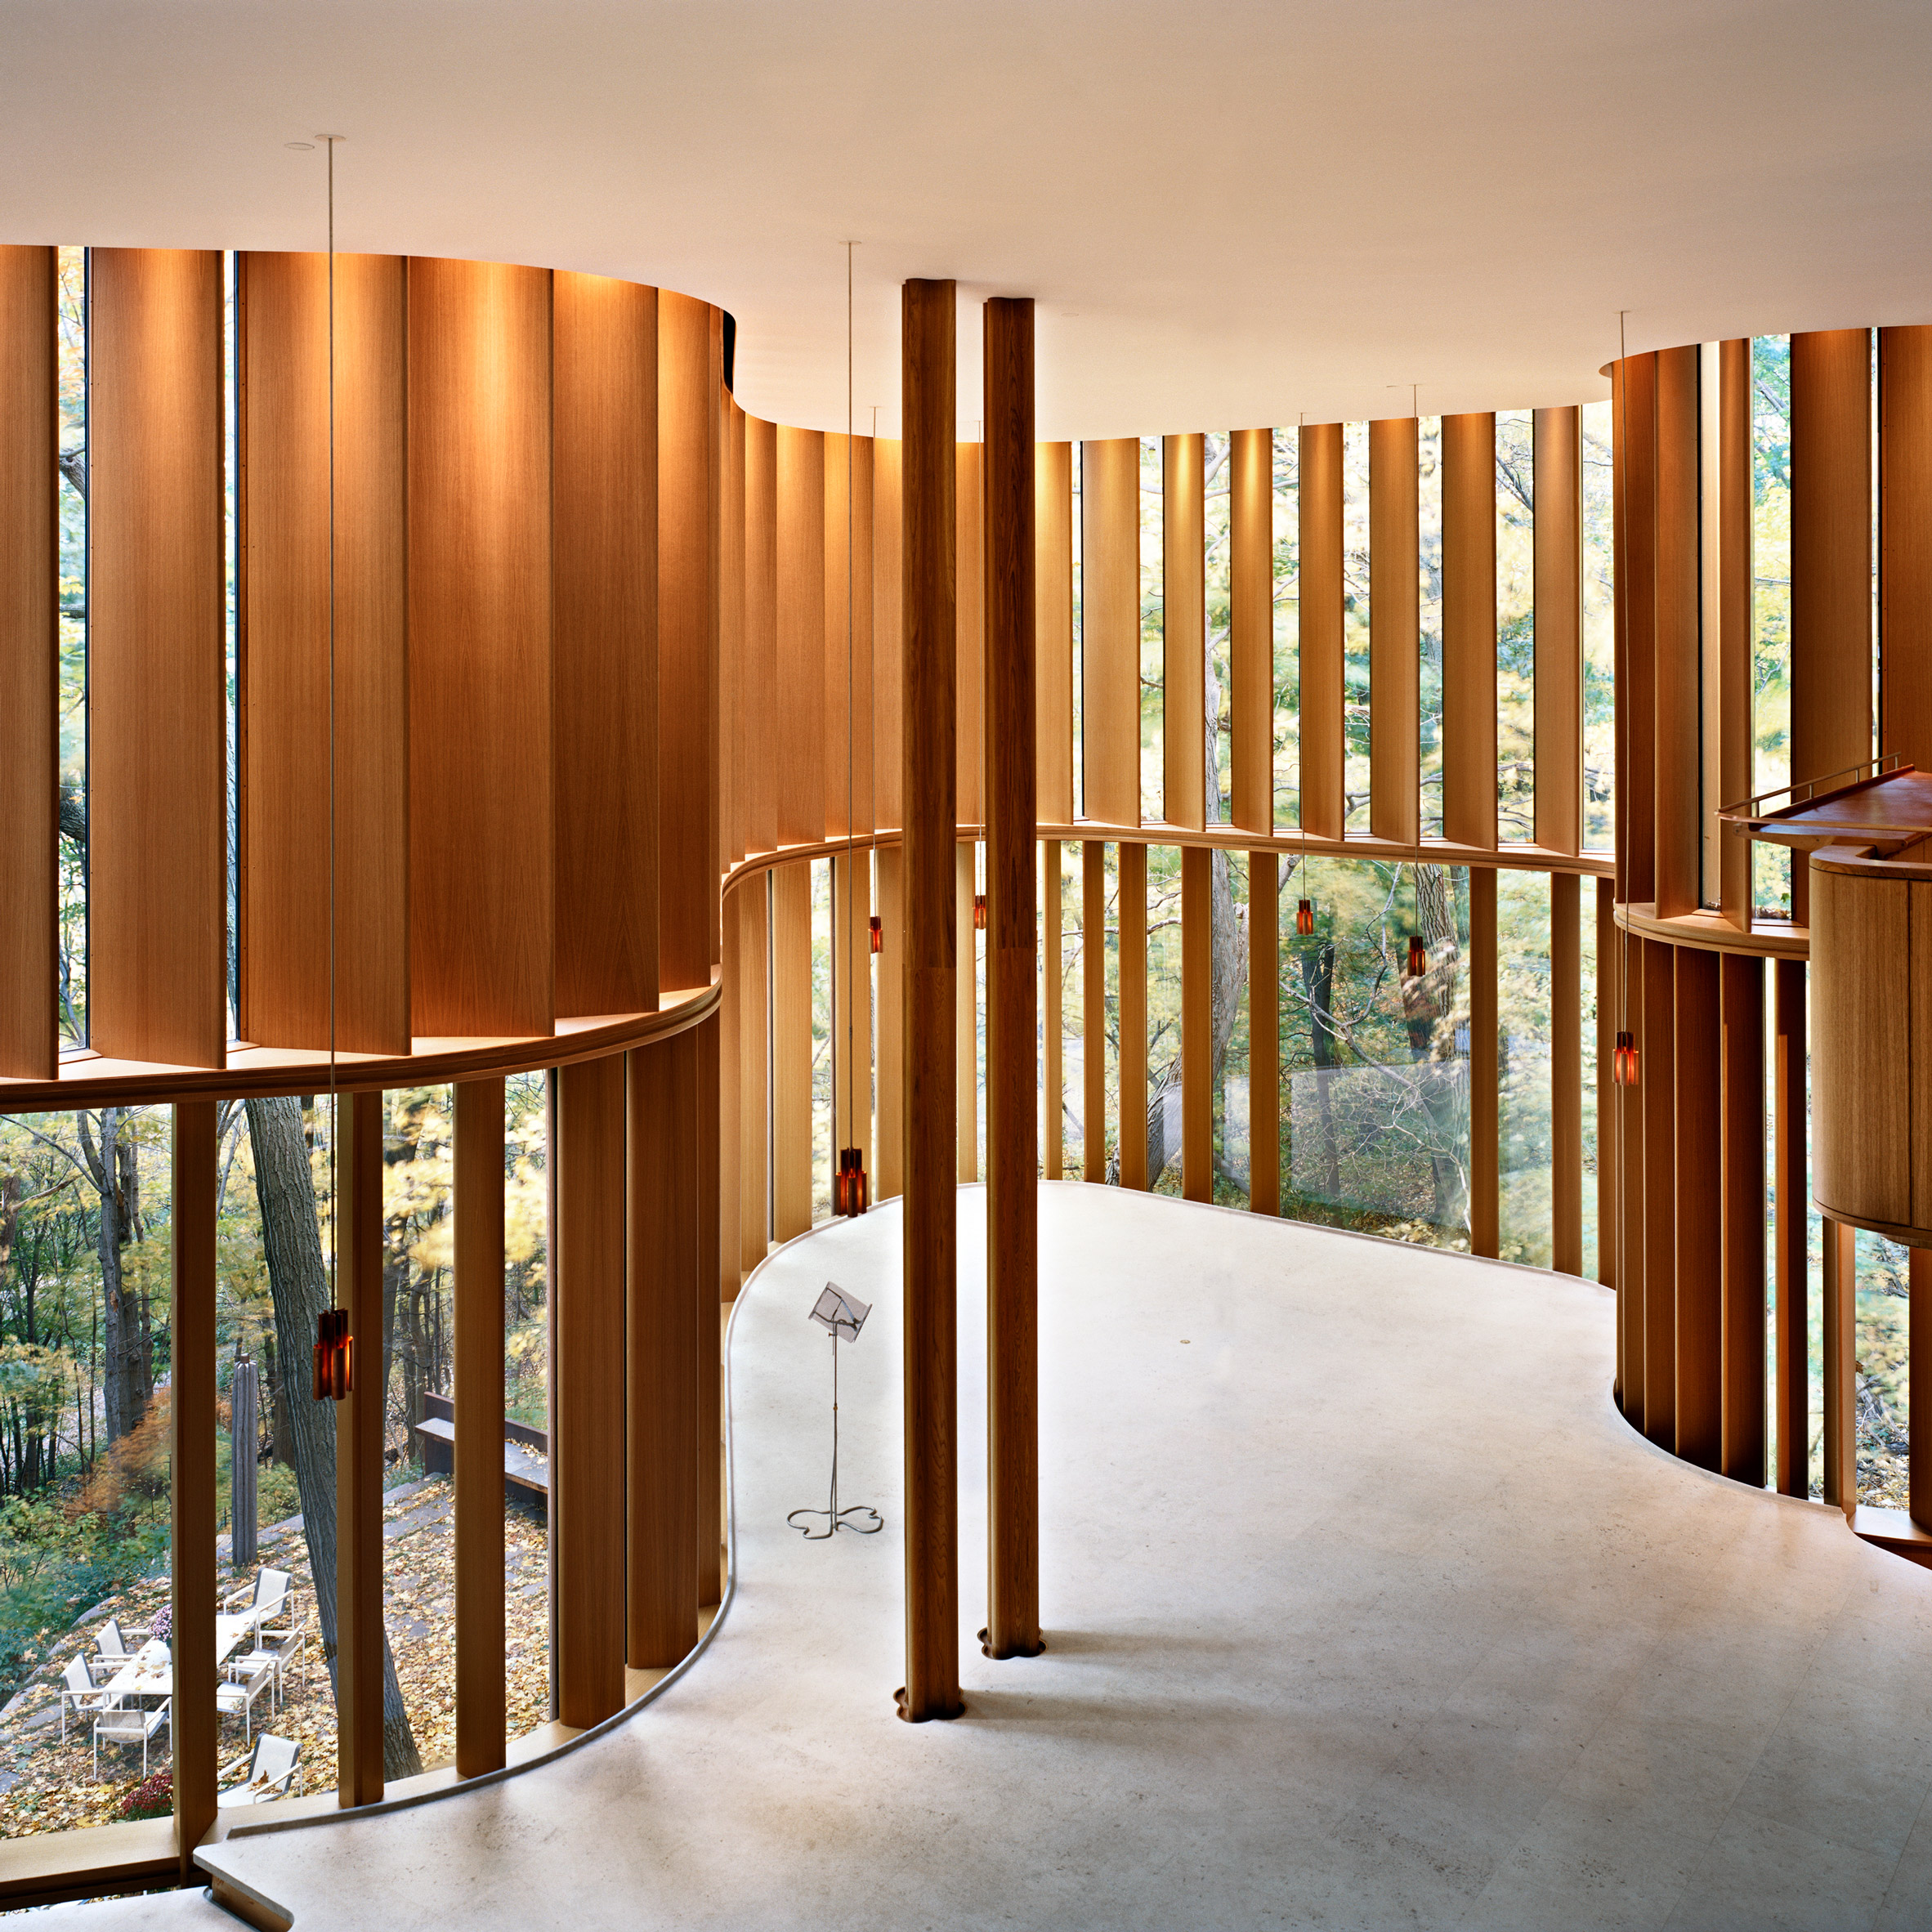 The Integral House by Shim-Sutcliffe